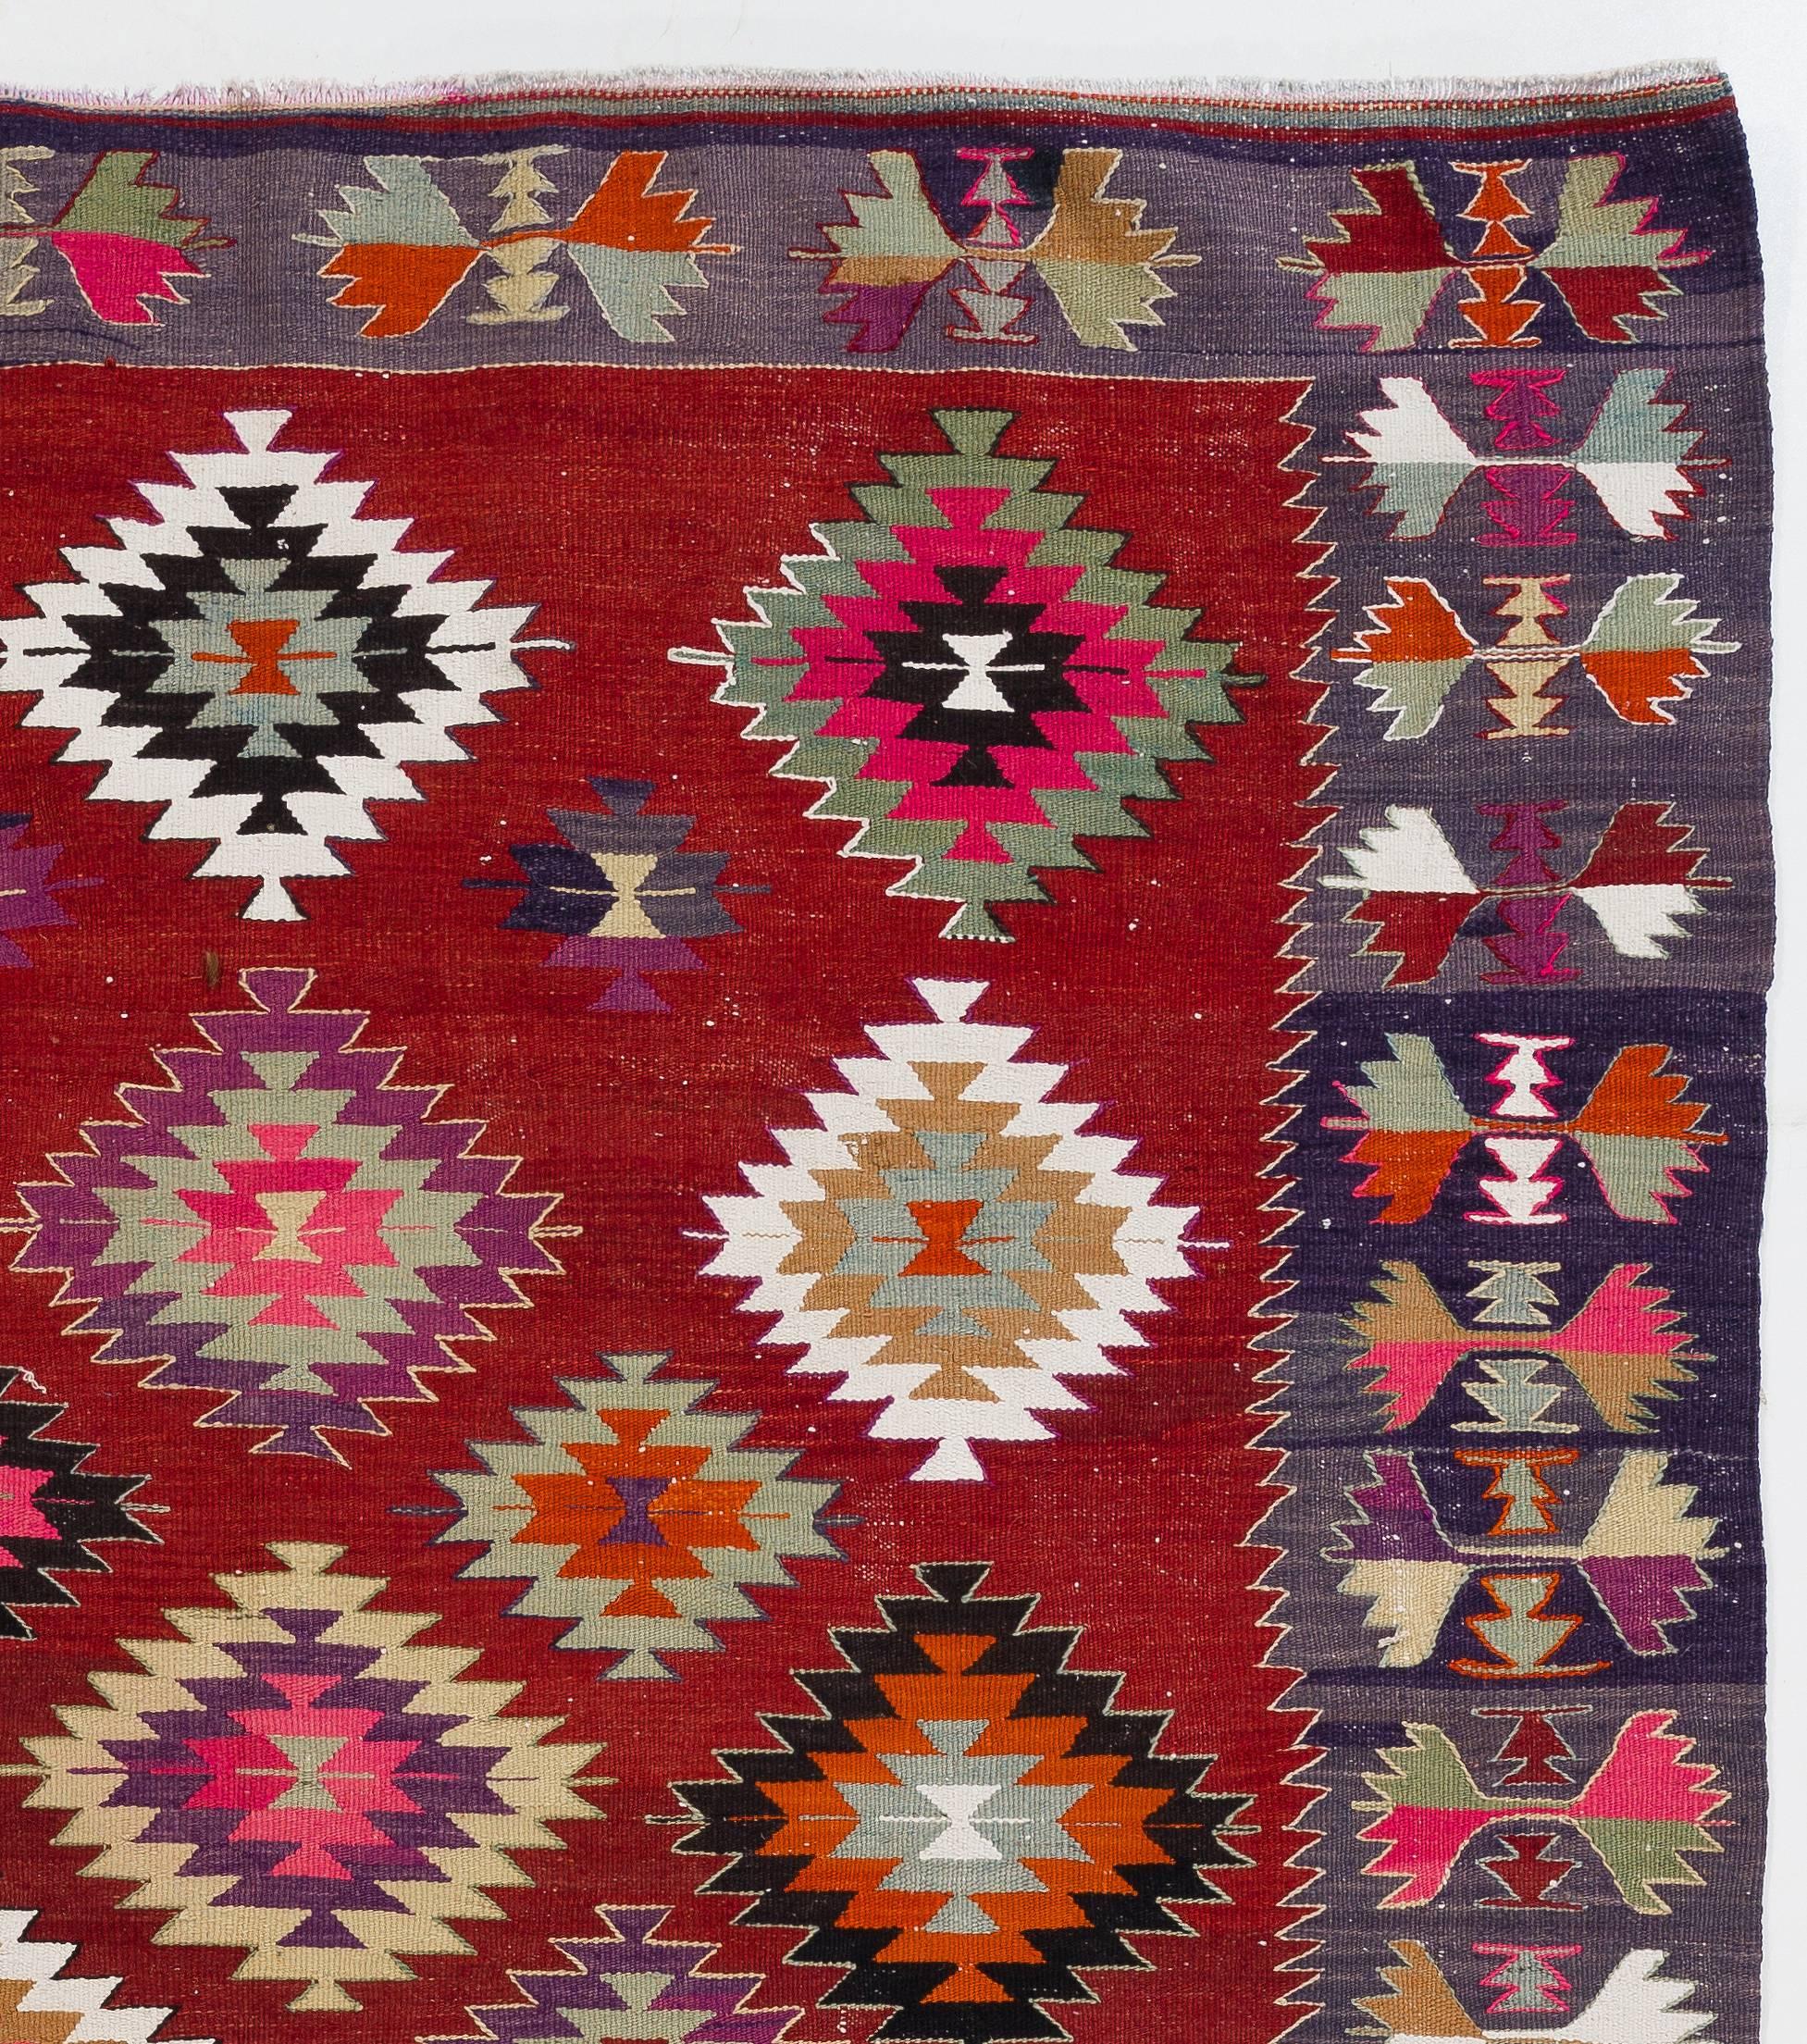 A colorful Turkish Kilim (flat-woven rug) in excellent original condition. It is finely handwoven with natural wool. Measures: 6.3 x 8.6 Ft.

This gorgeous Kilim features stepped diamond patterns nestled within each other, free-floating all-over